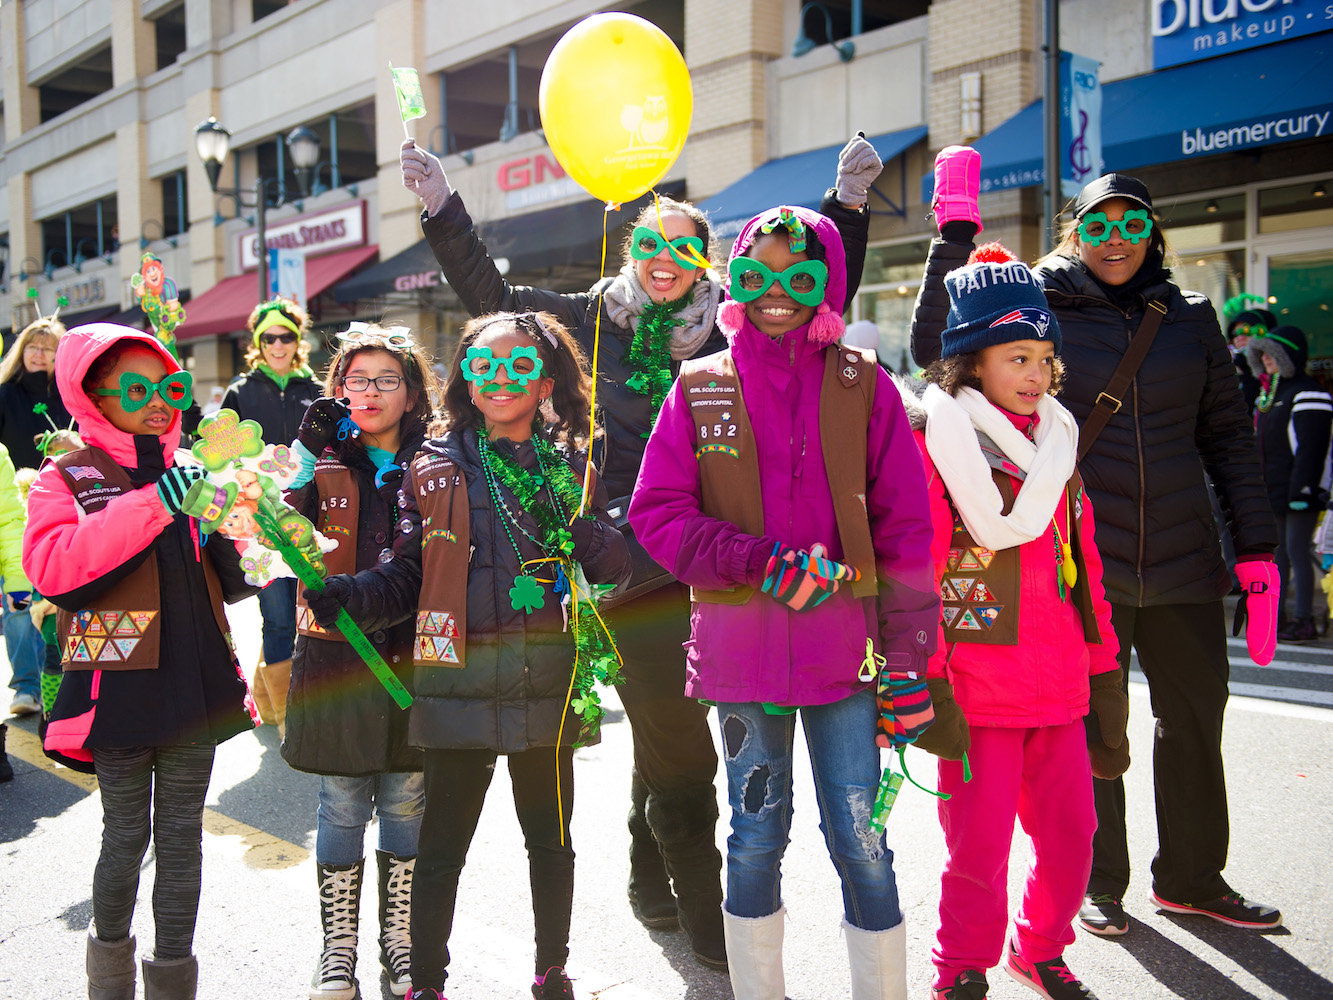 Gallery 1 - The City of Gaithersburg’s annual St. Patrick’s Day Parade starts at 10 a.m. on Saturday, March 10.